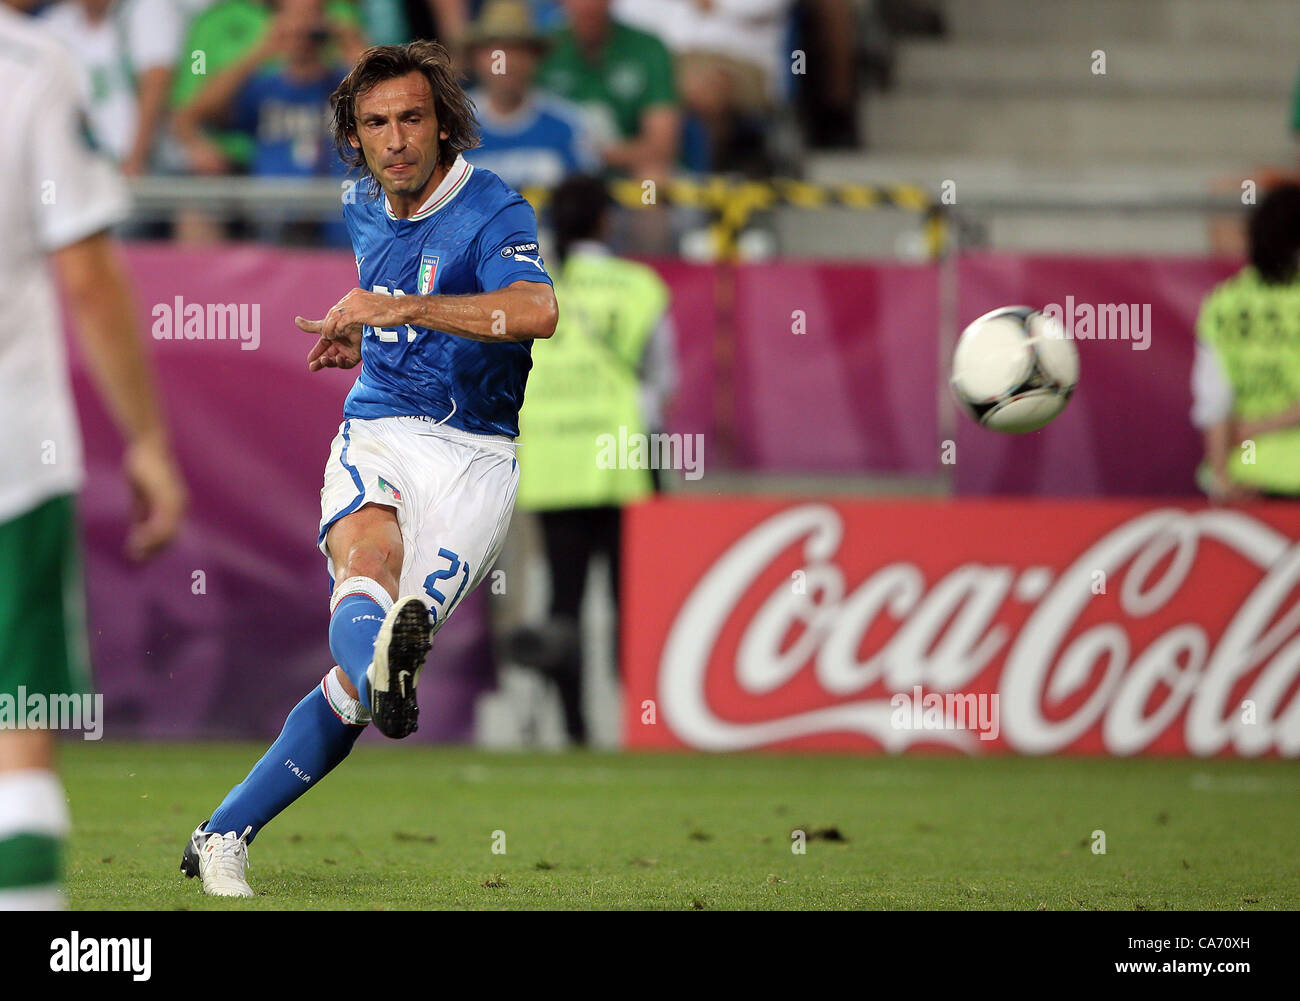 Andrea Pirlo High Resolution Stock Photography and Images - Alamy